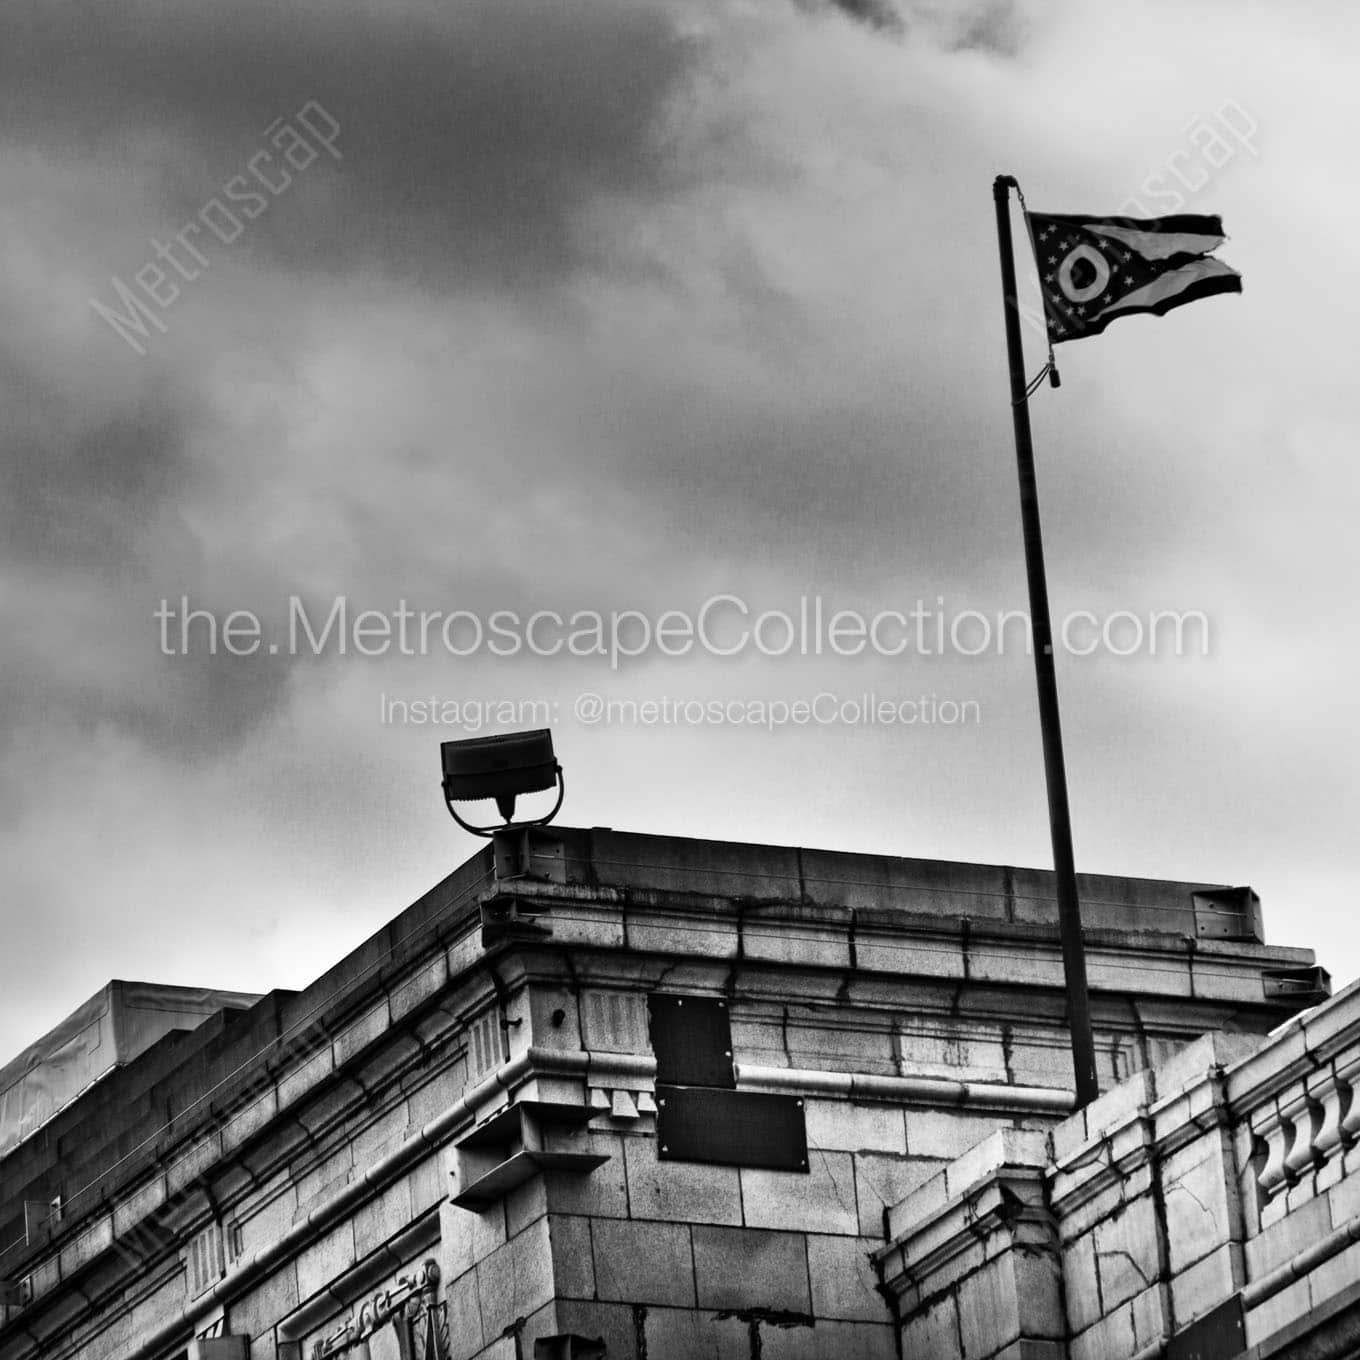 the ohio flag whipping in wind Black & White Wall Art